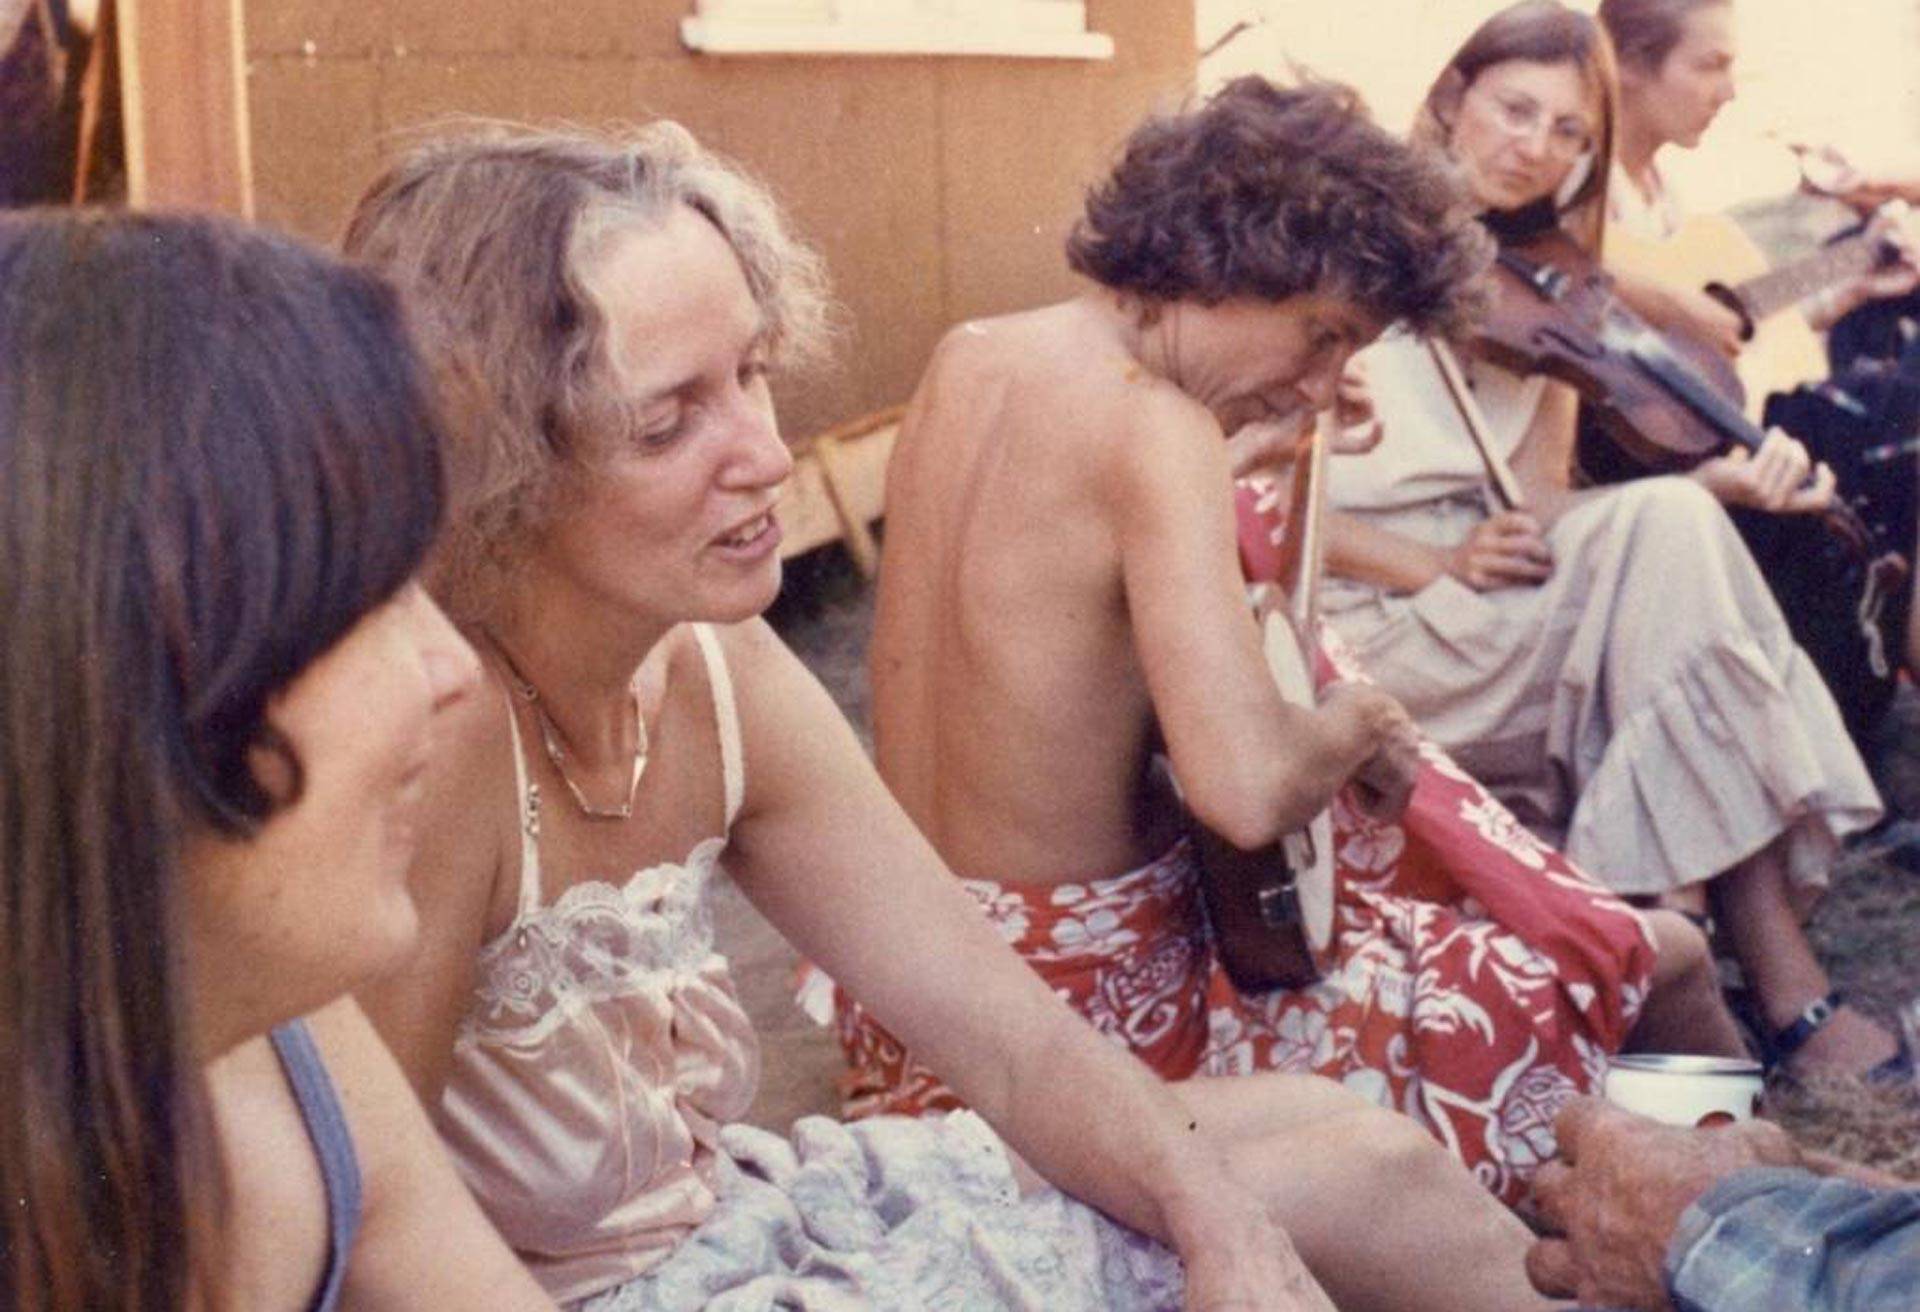 Salli Rasberry and Delia Moon with others at a party. An upcoming panel at the Main San Francisco Library explores the unsung contributions of women during the 1960s counterculture. Courtesy Salli Rasberry